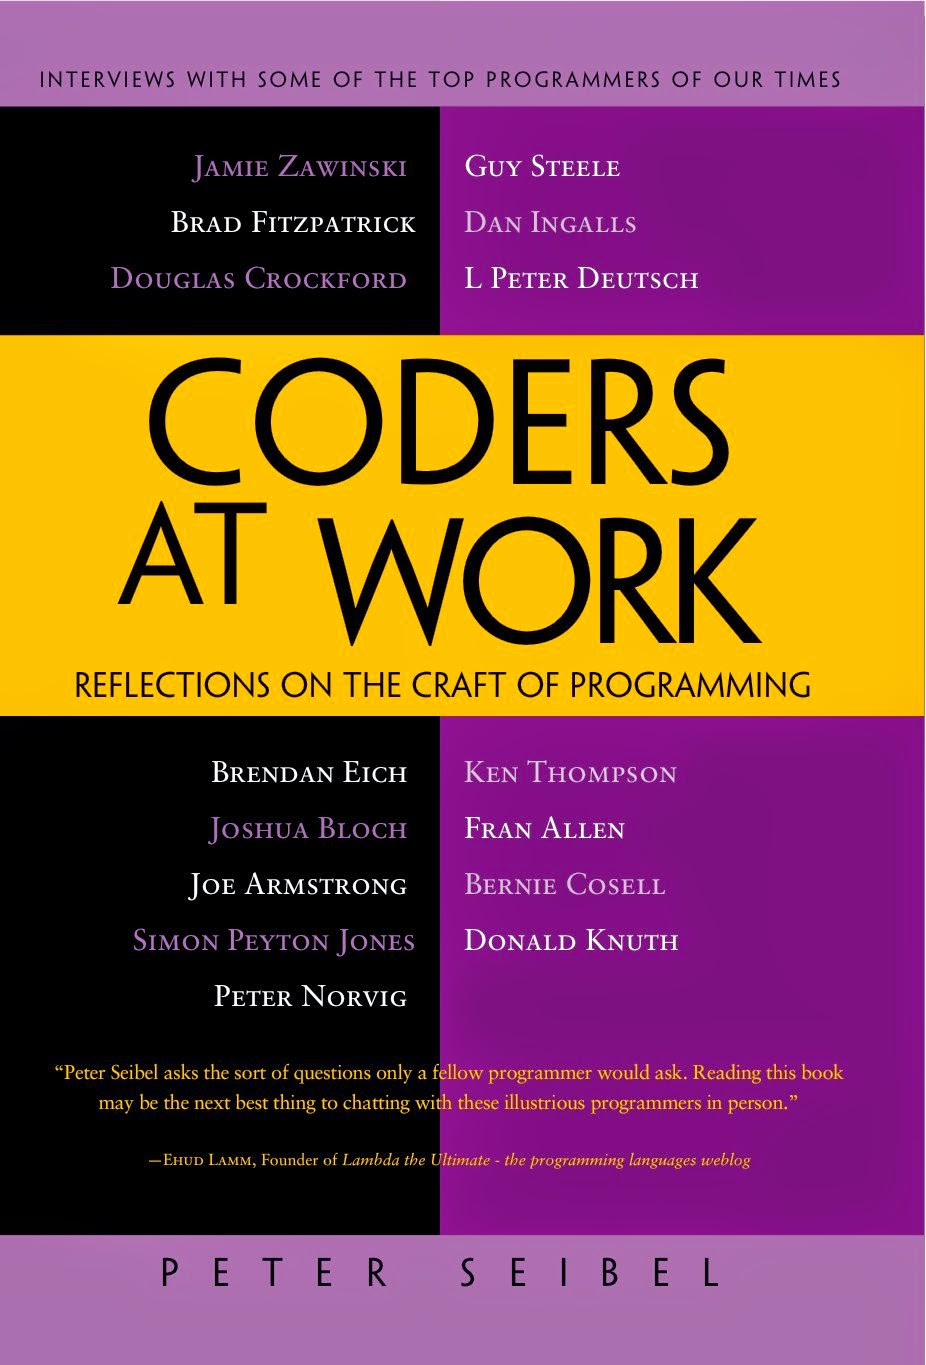 Books to become better coders